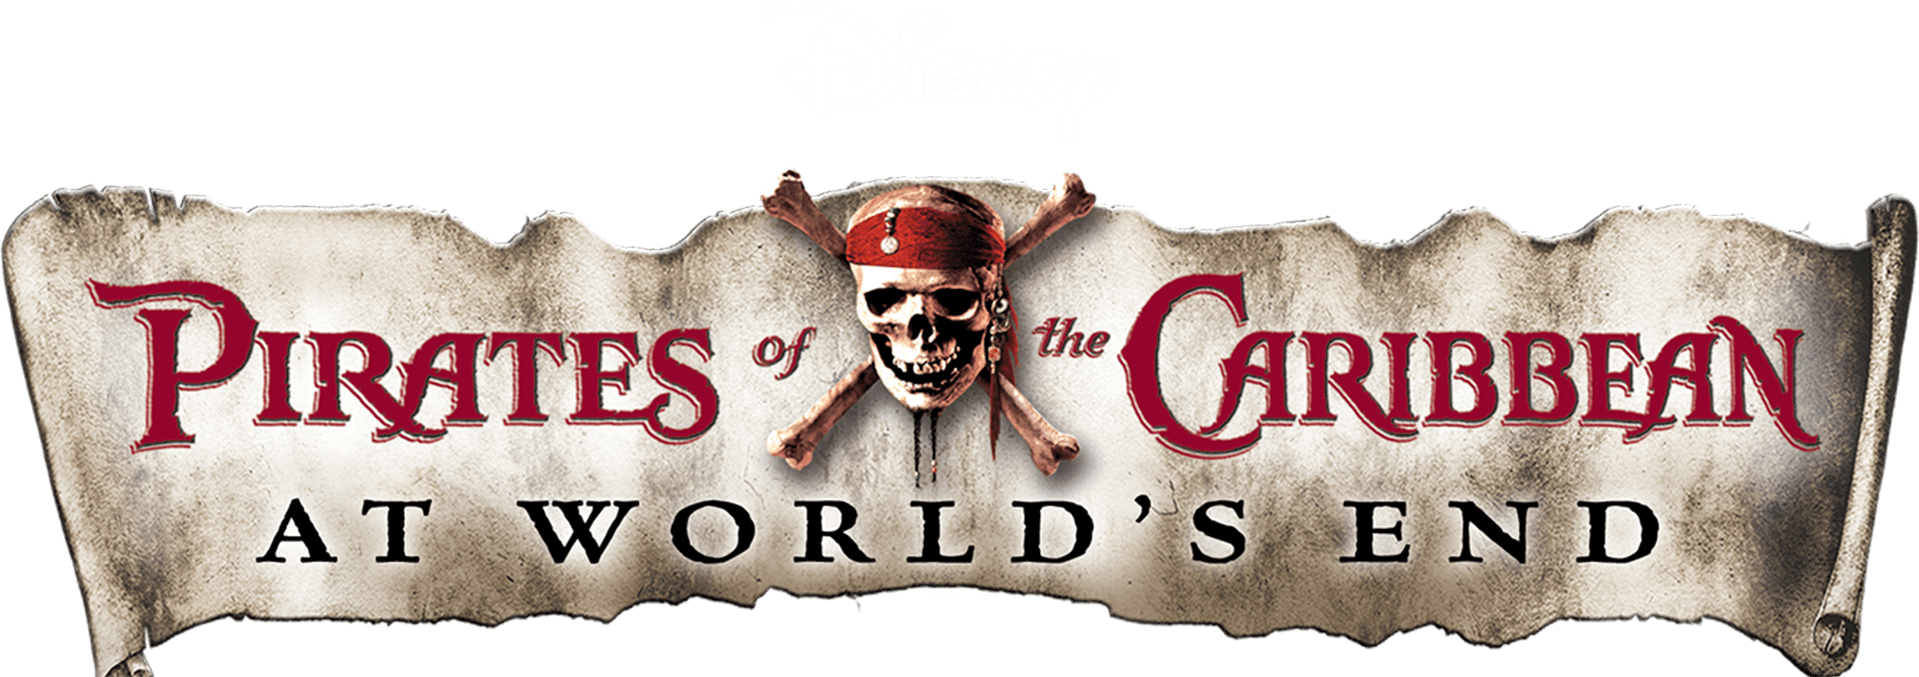 pirates-of-the-caribbean-at-world-s-end-disney